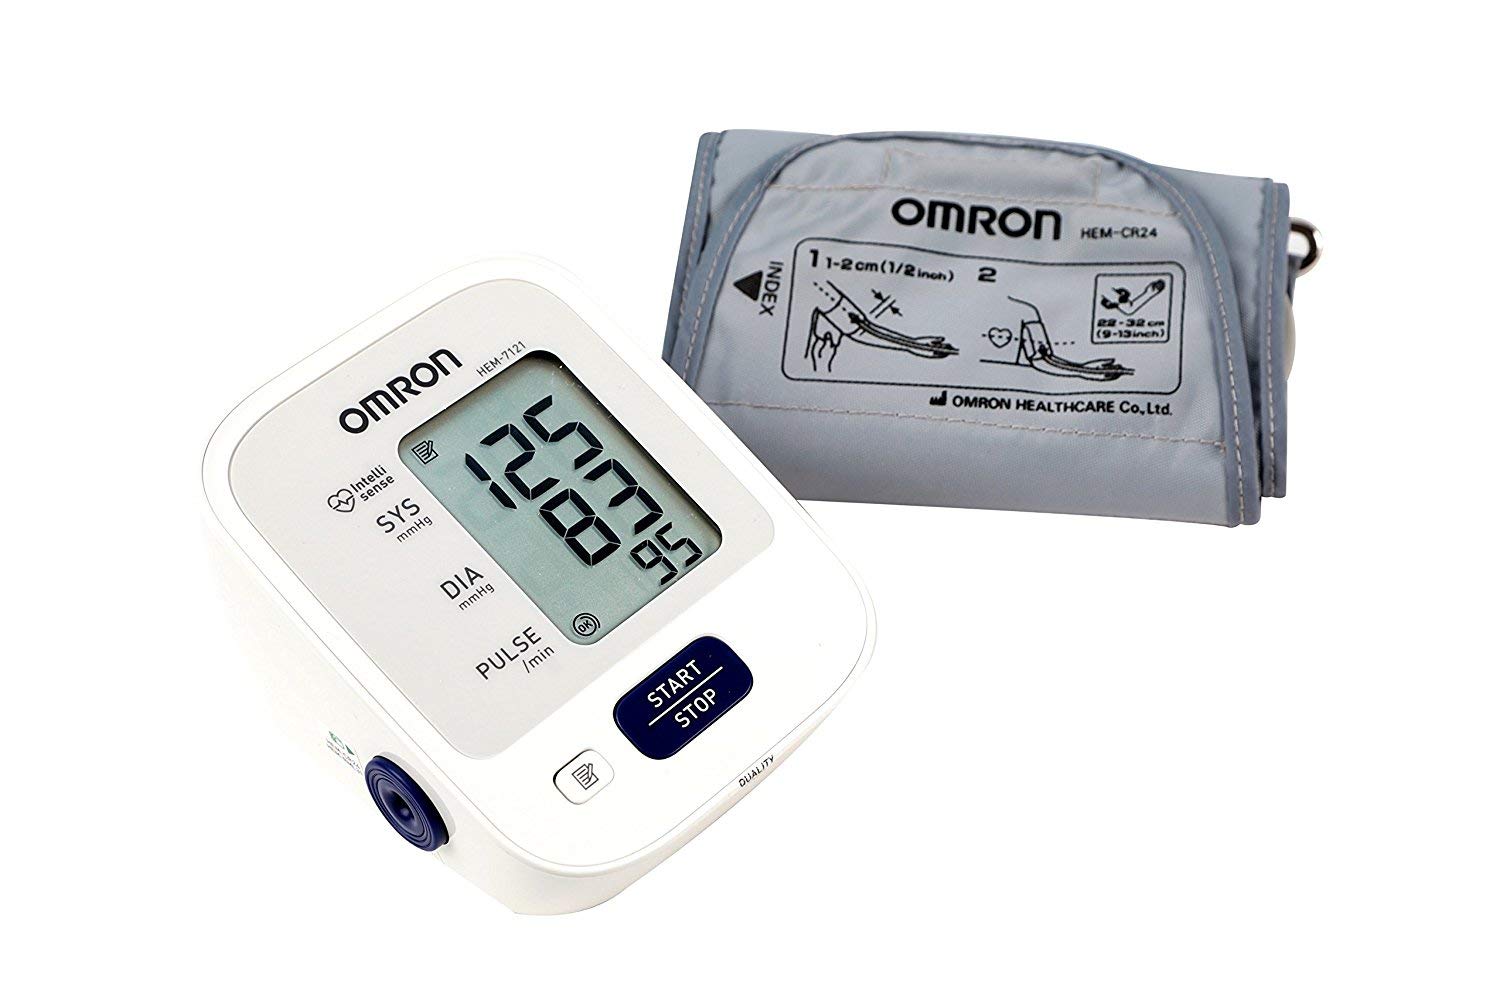 Omron Hem 7124 Fully Automatic Digital Blood Pressure Monitor with  Intellisense Technology Most Accurate Measurement